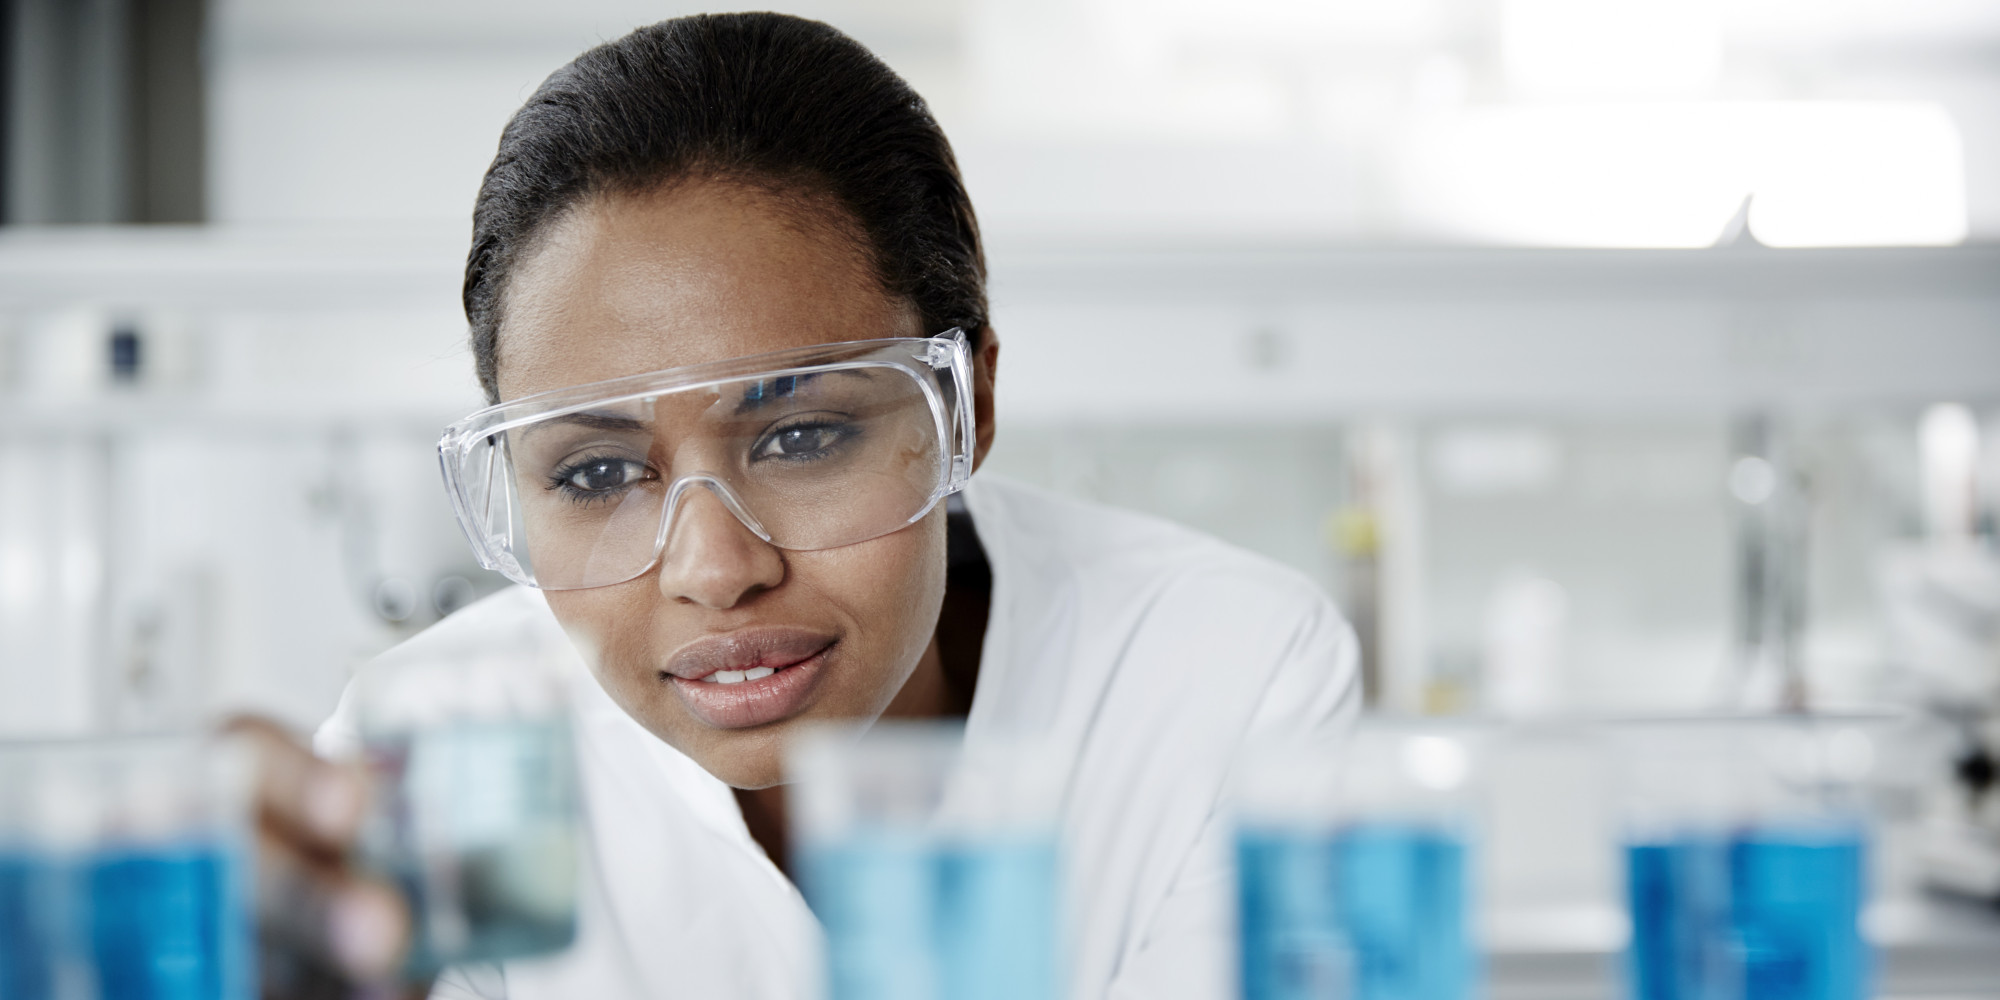 An Easy Way To Help Women In Science | HuffPost